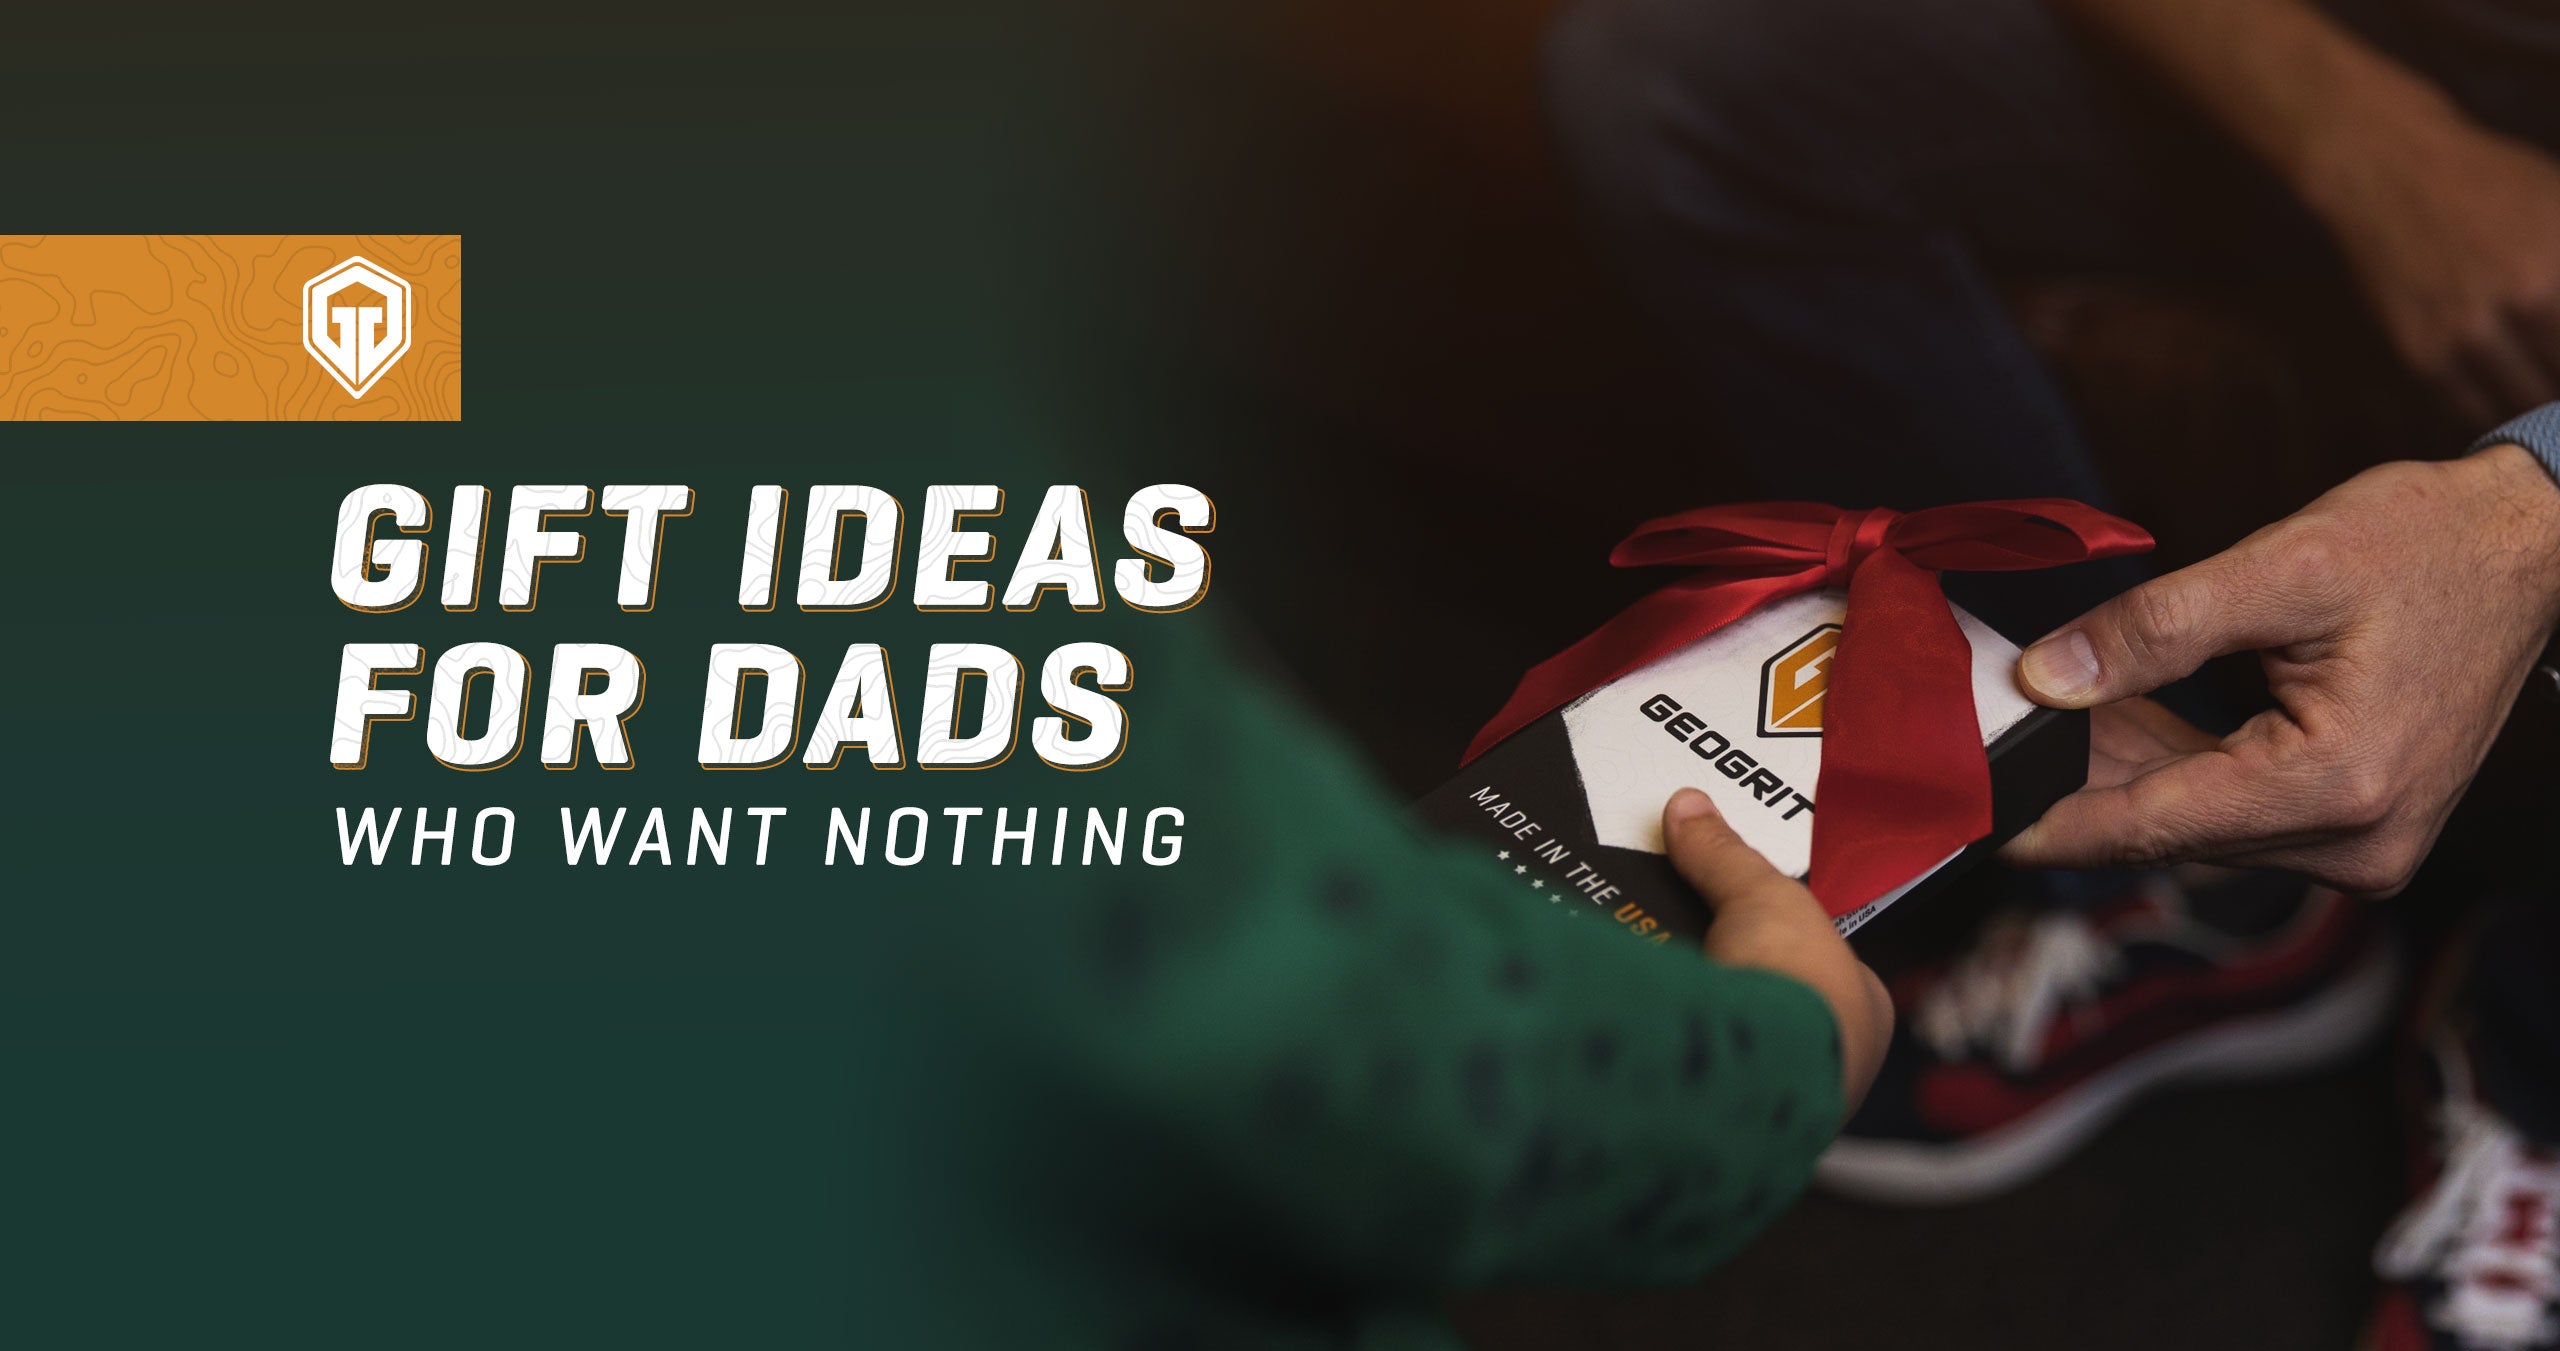 Top 10 Christmas Gifts for Dads